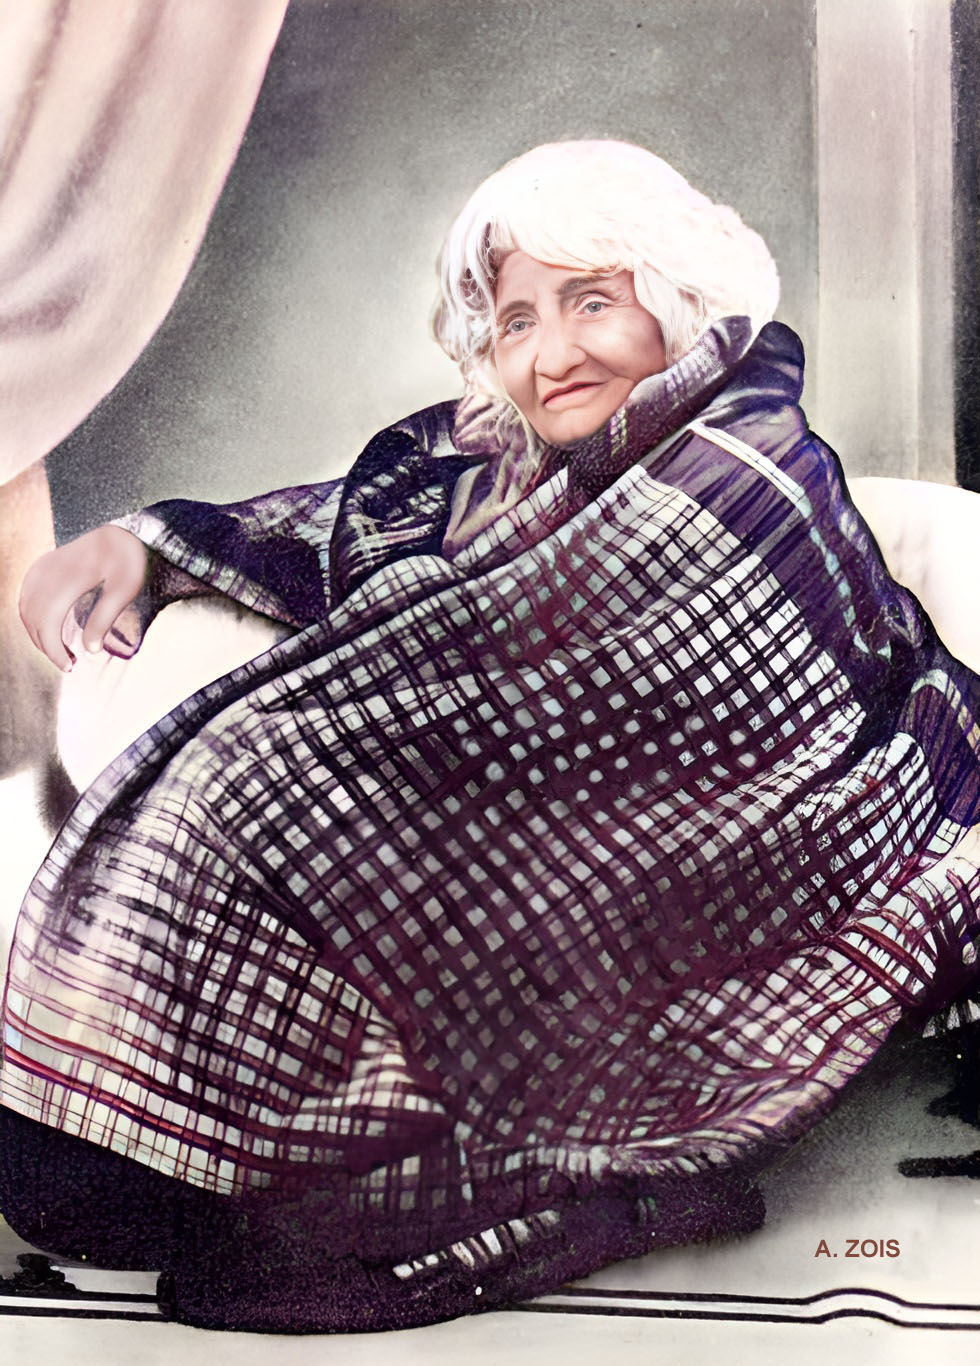  Image colourized by Anthony Zois.